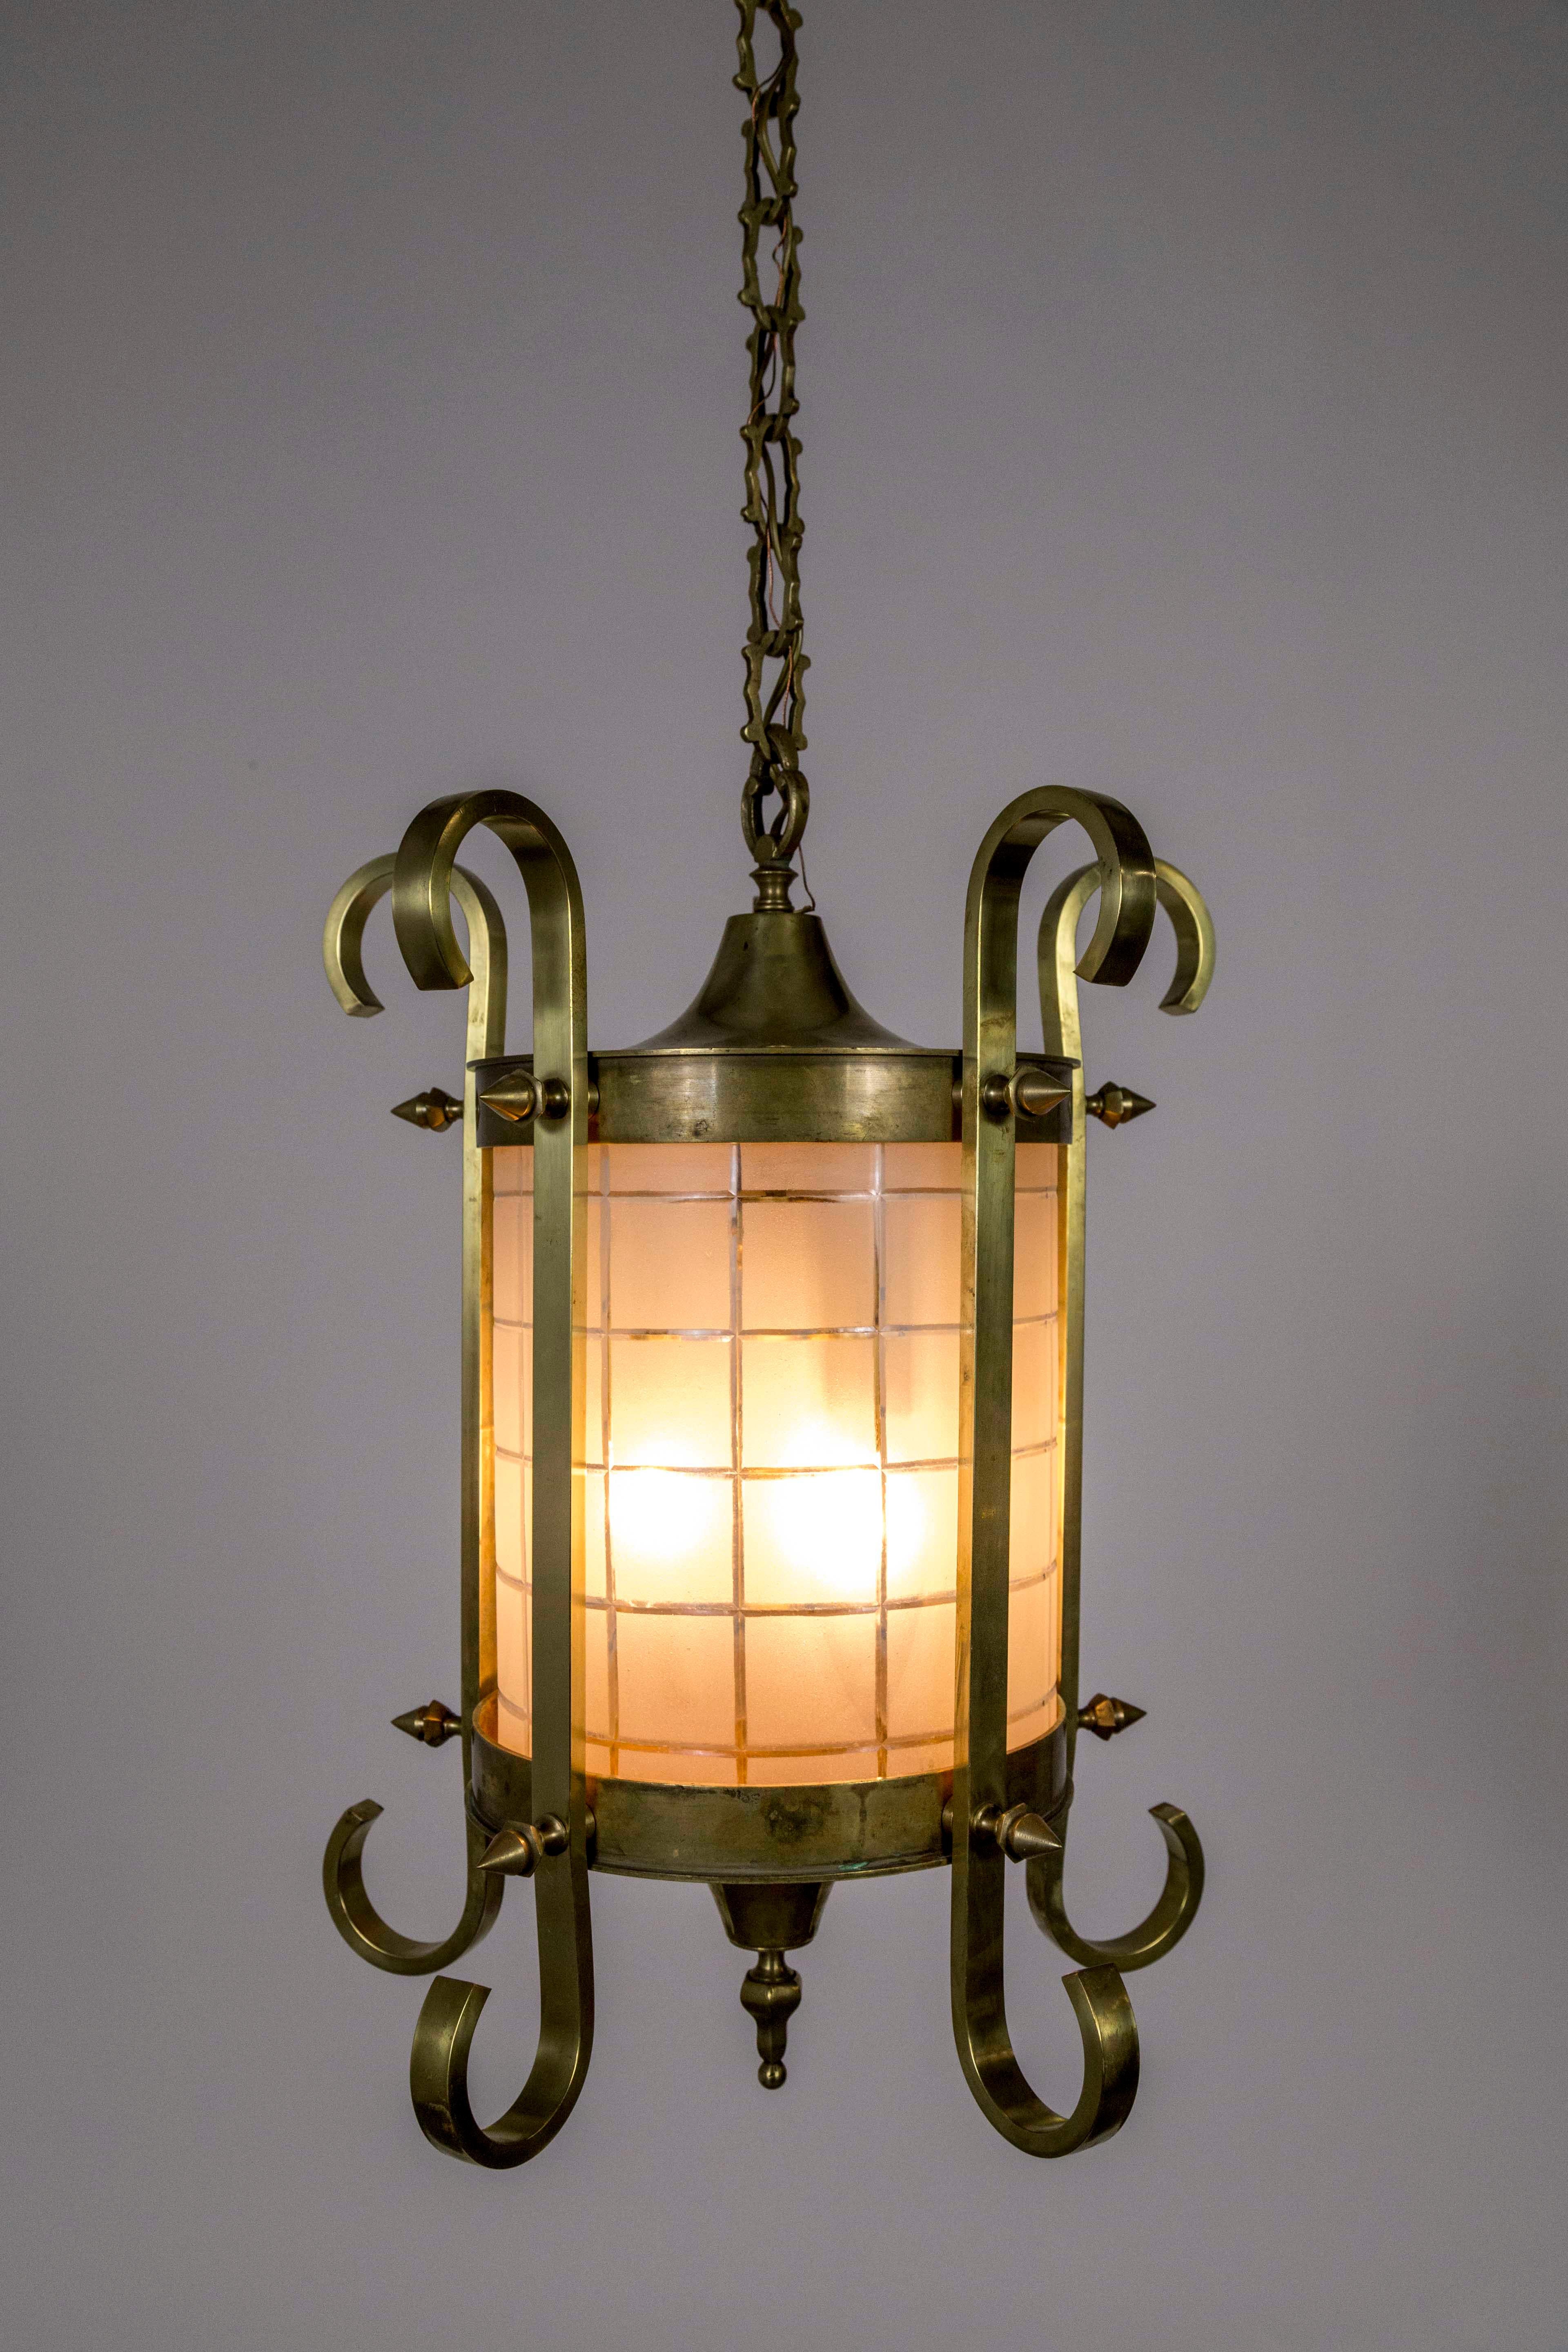 Brass and bronze lantern with unique, spike and scroll details from the 1920s, holding a beautifully hand etched, and beveled cylinder, glass shade. The decorative chain and ceiling canopy are original, American. Measures: 25” height x 17” diameter,